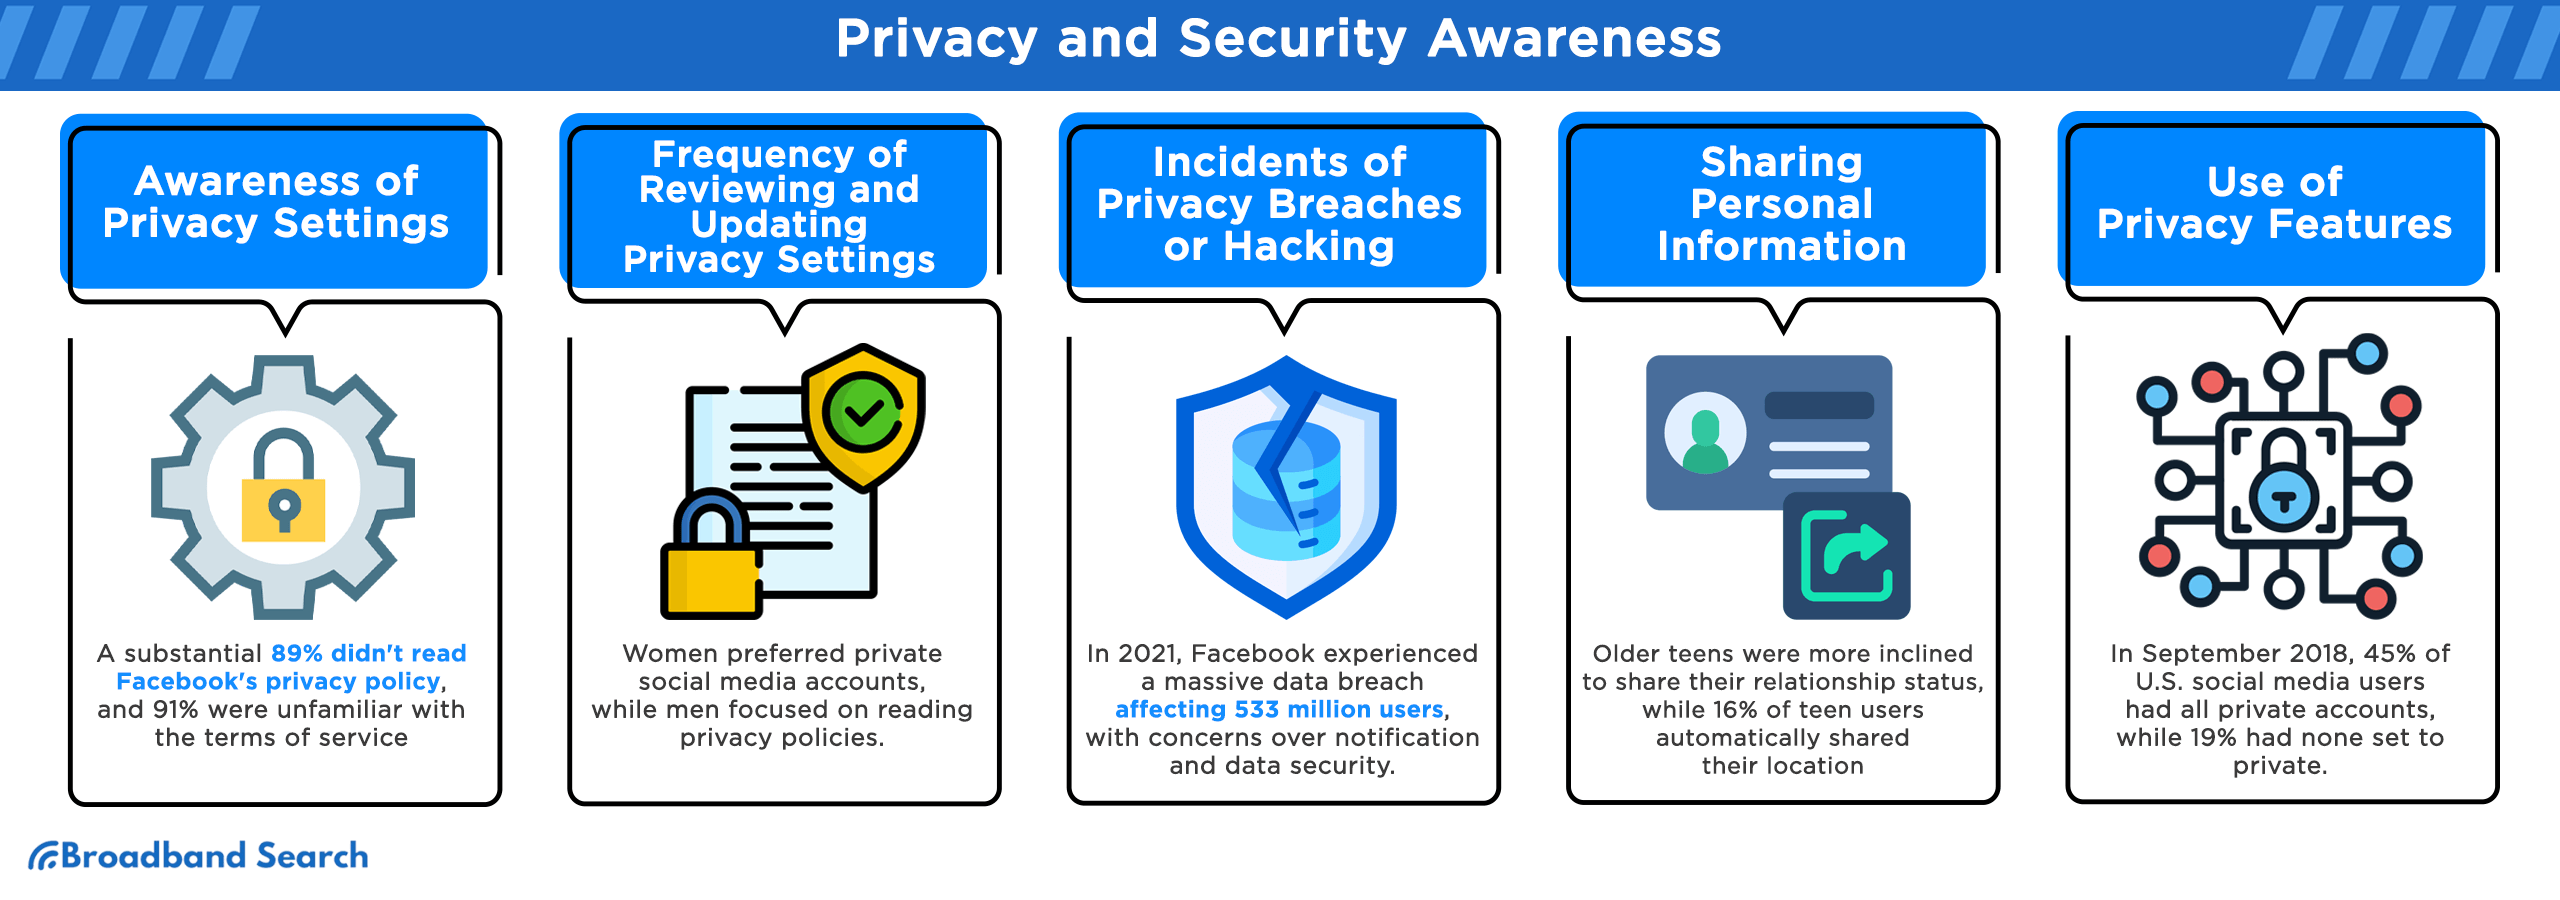 Tips on fostering privacy and security awareness online